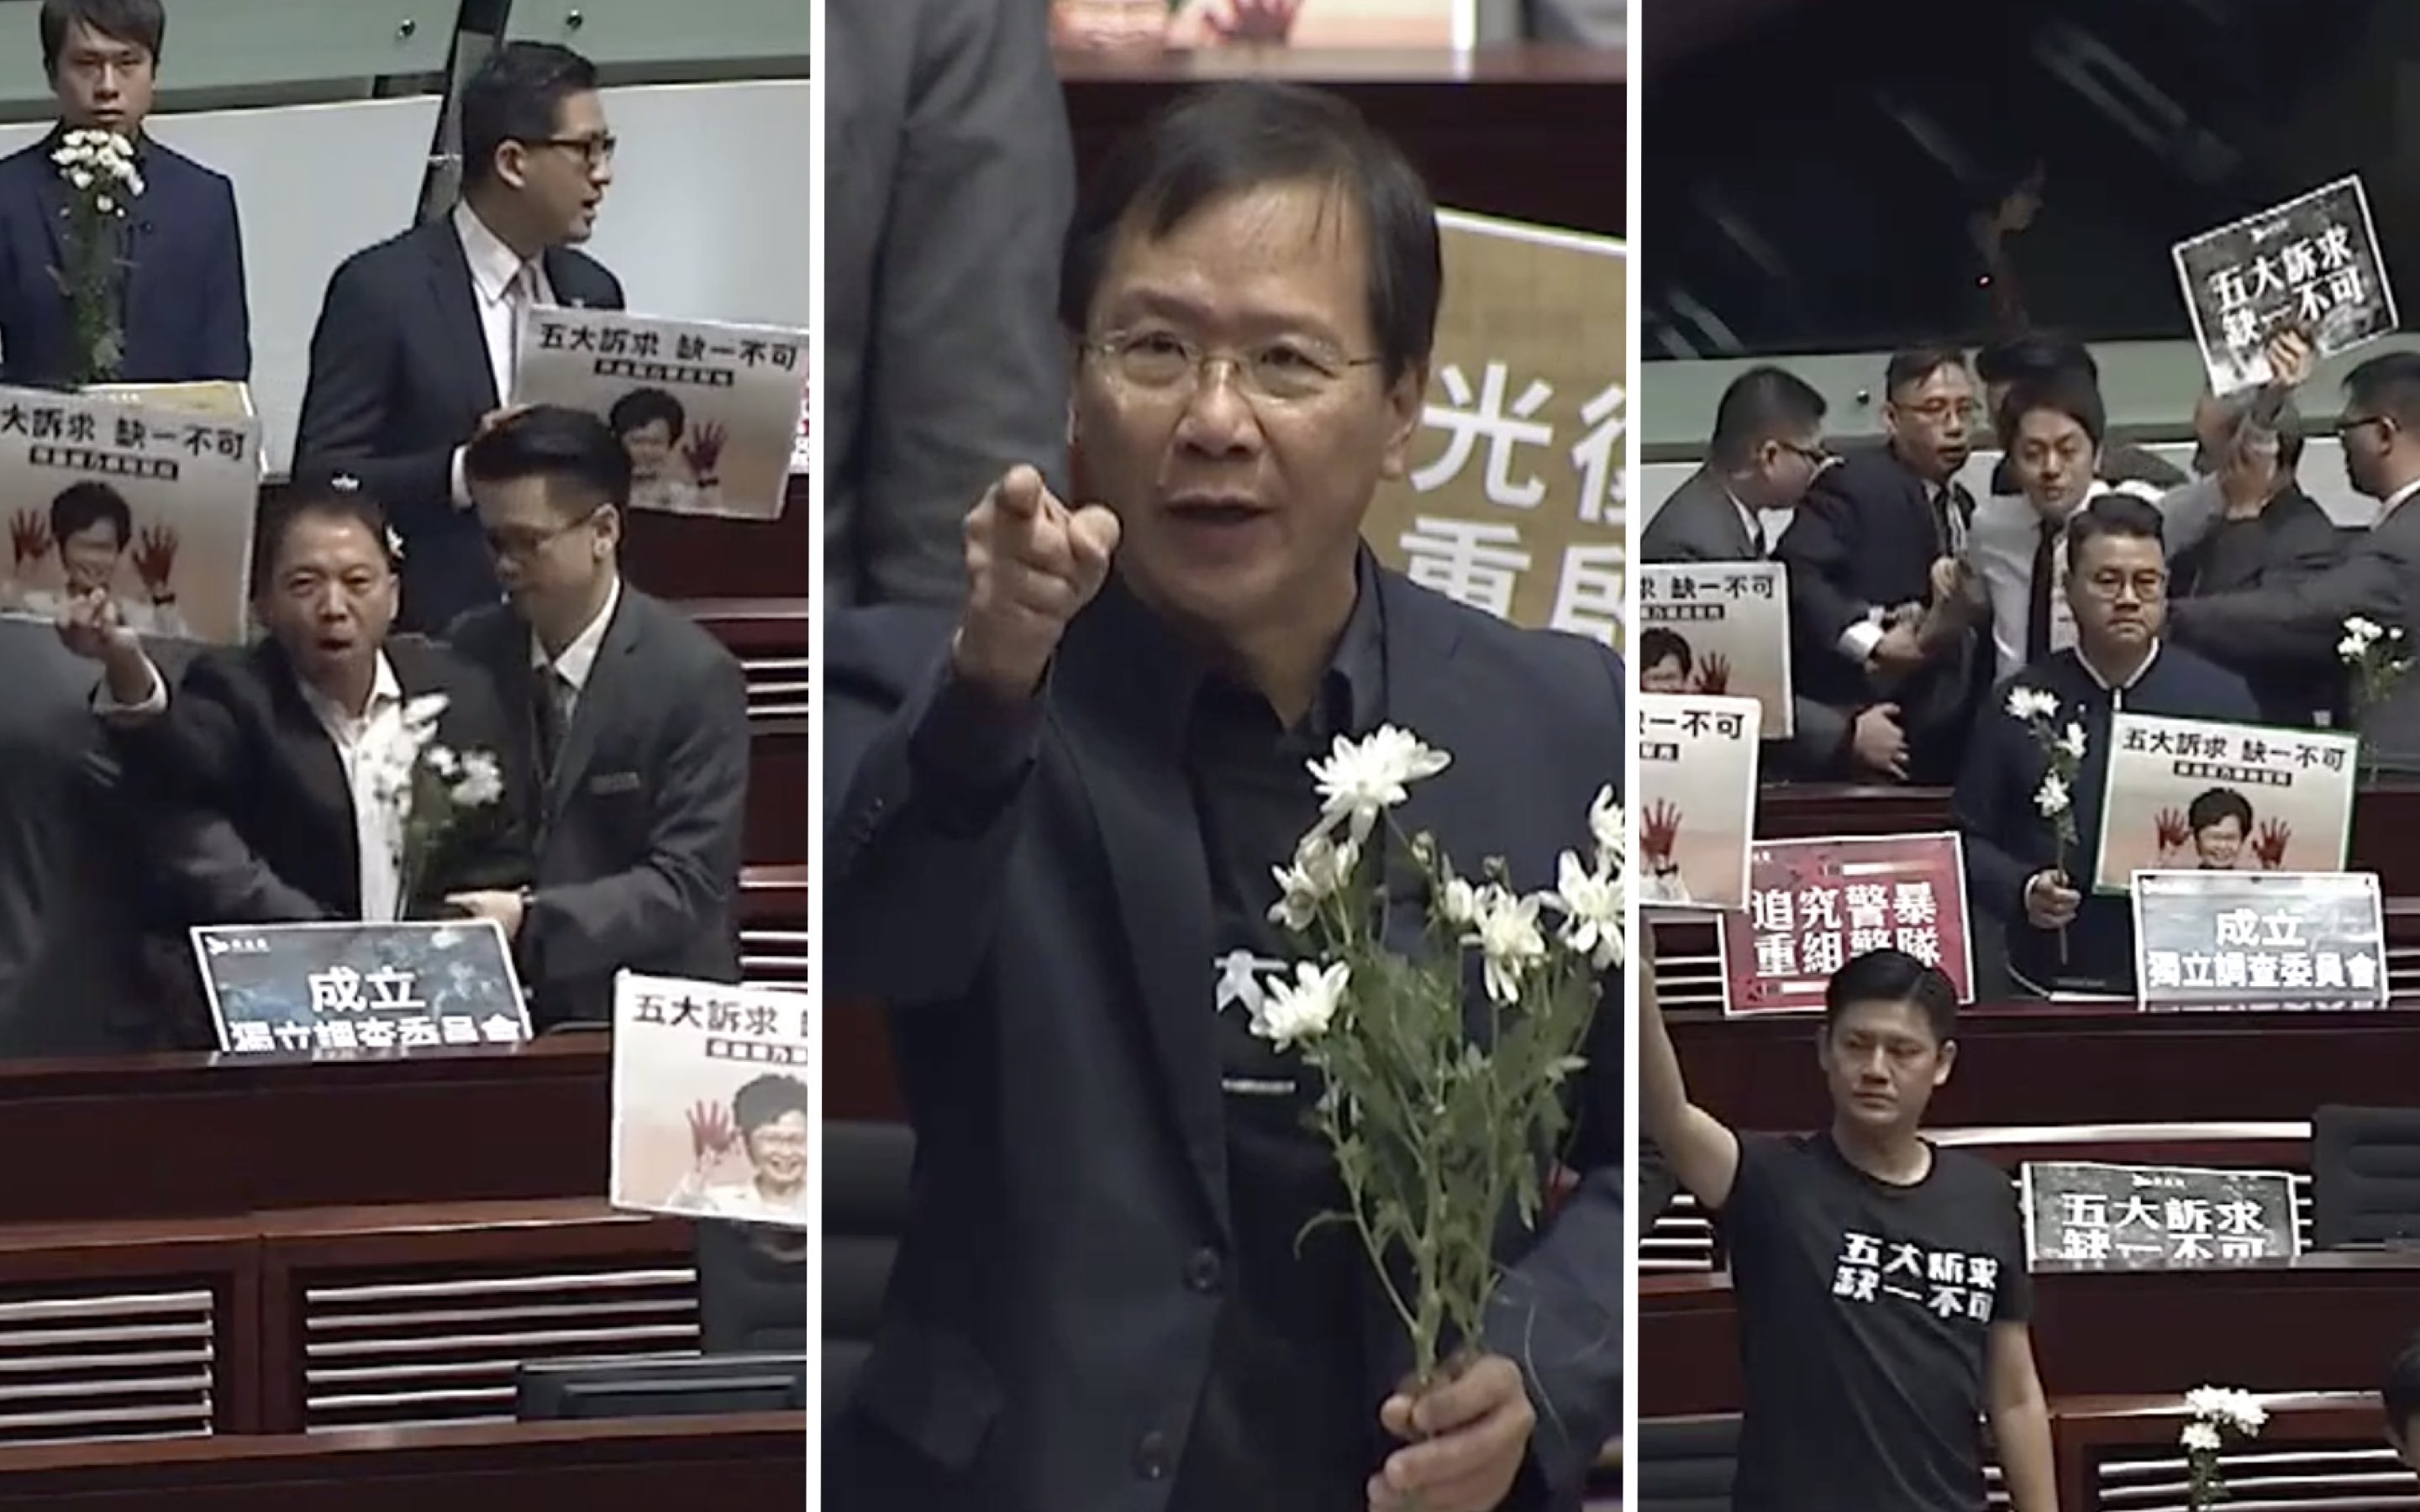 (From left to right) Pro-democracy lawmakers Wu Chi-wai, Kwok Ka-ki, and Ted Hui were told to leave the Legislative Council chamber for disrupting Carrie Lam’s policy address Q&A with lawmakers. Screengrabs via Apple Daily.